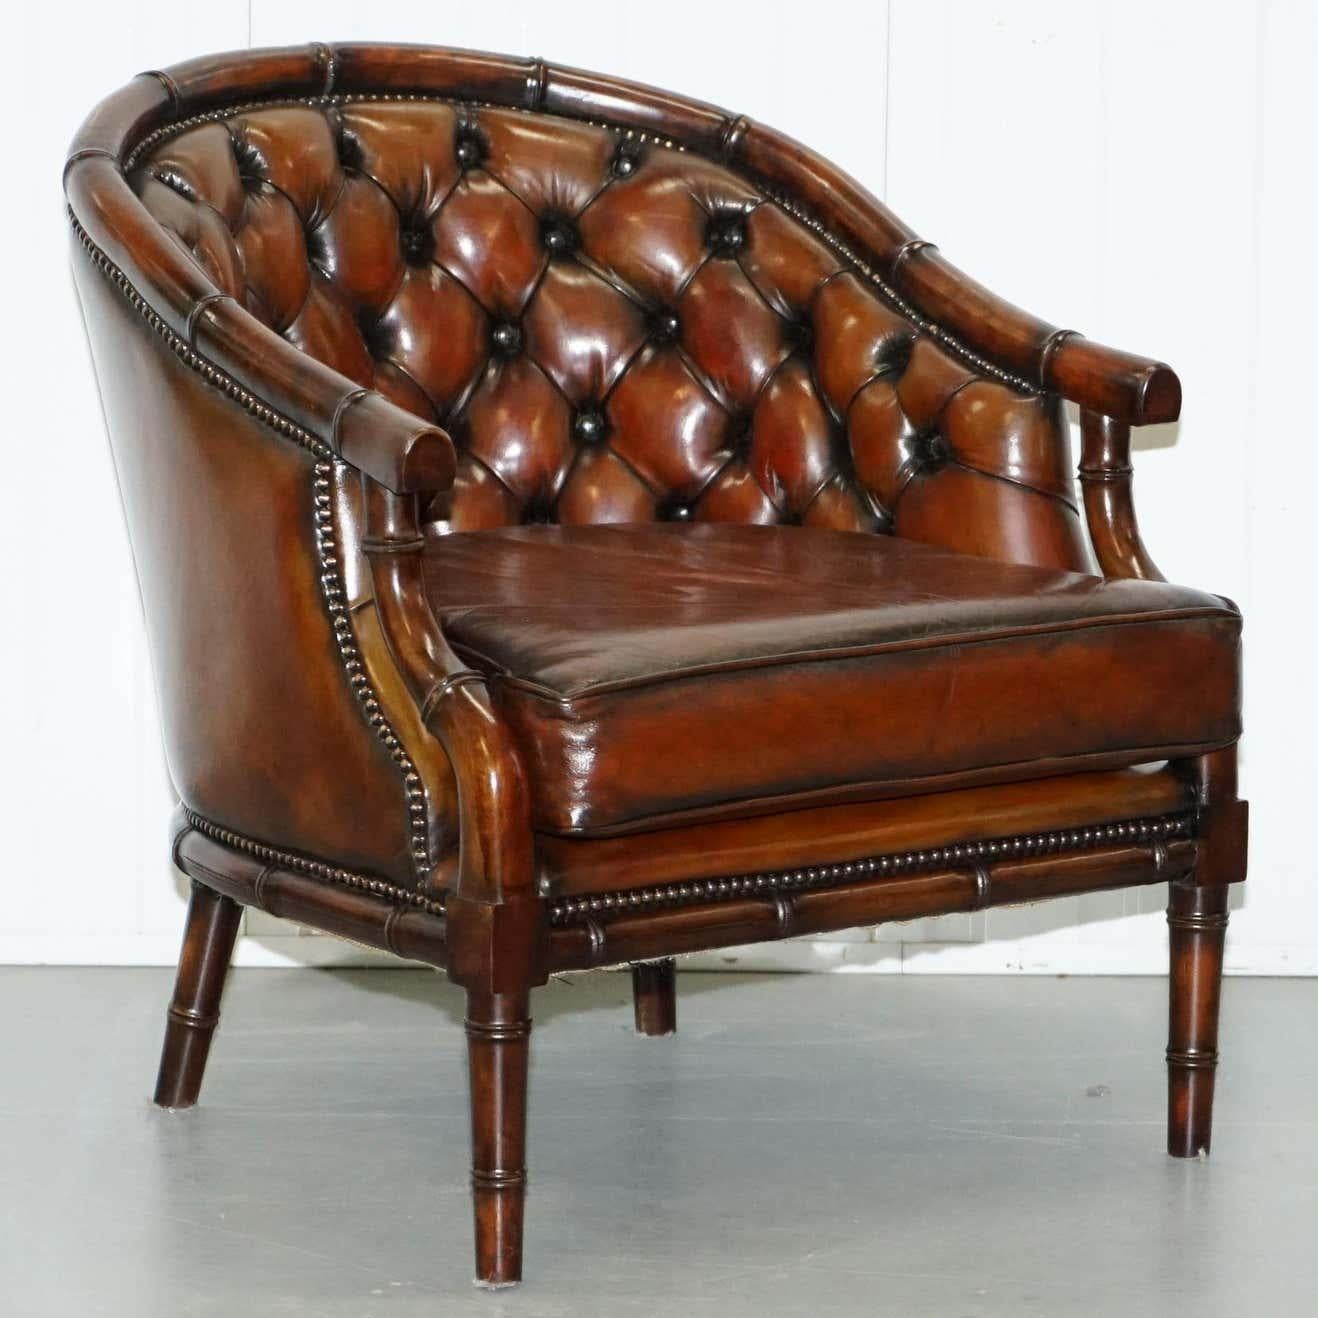 We are delighted to offer this pair of circa 1900’s fully restored Chesterfield armchairs with famboo framework.

A very desirable and highly collectable pair, the frames are all hand carved from mahogany and are what’s called Famboo which is fake